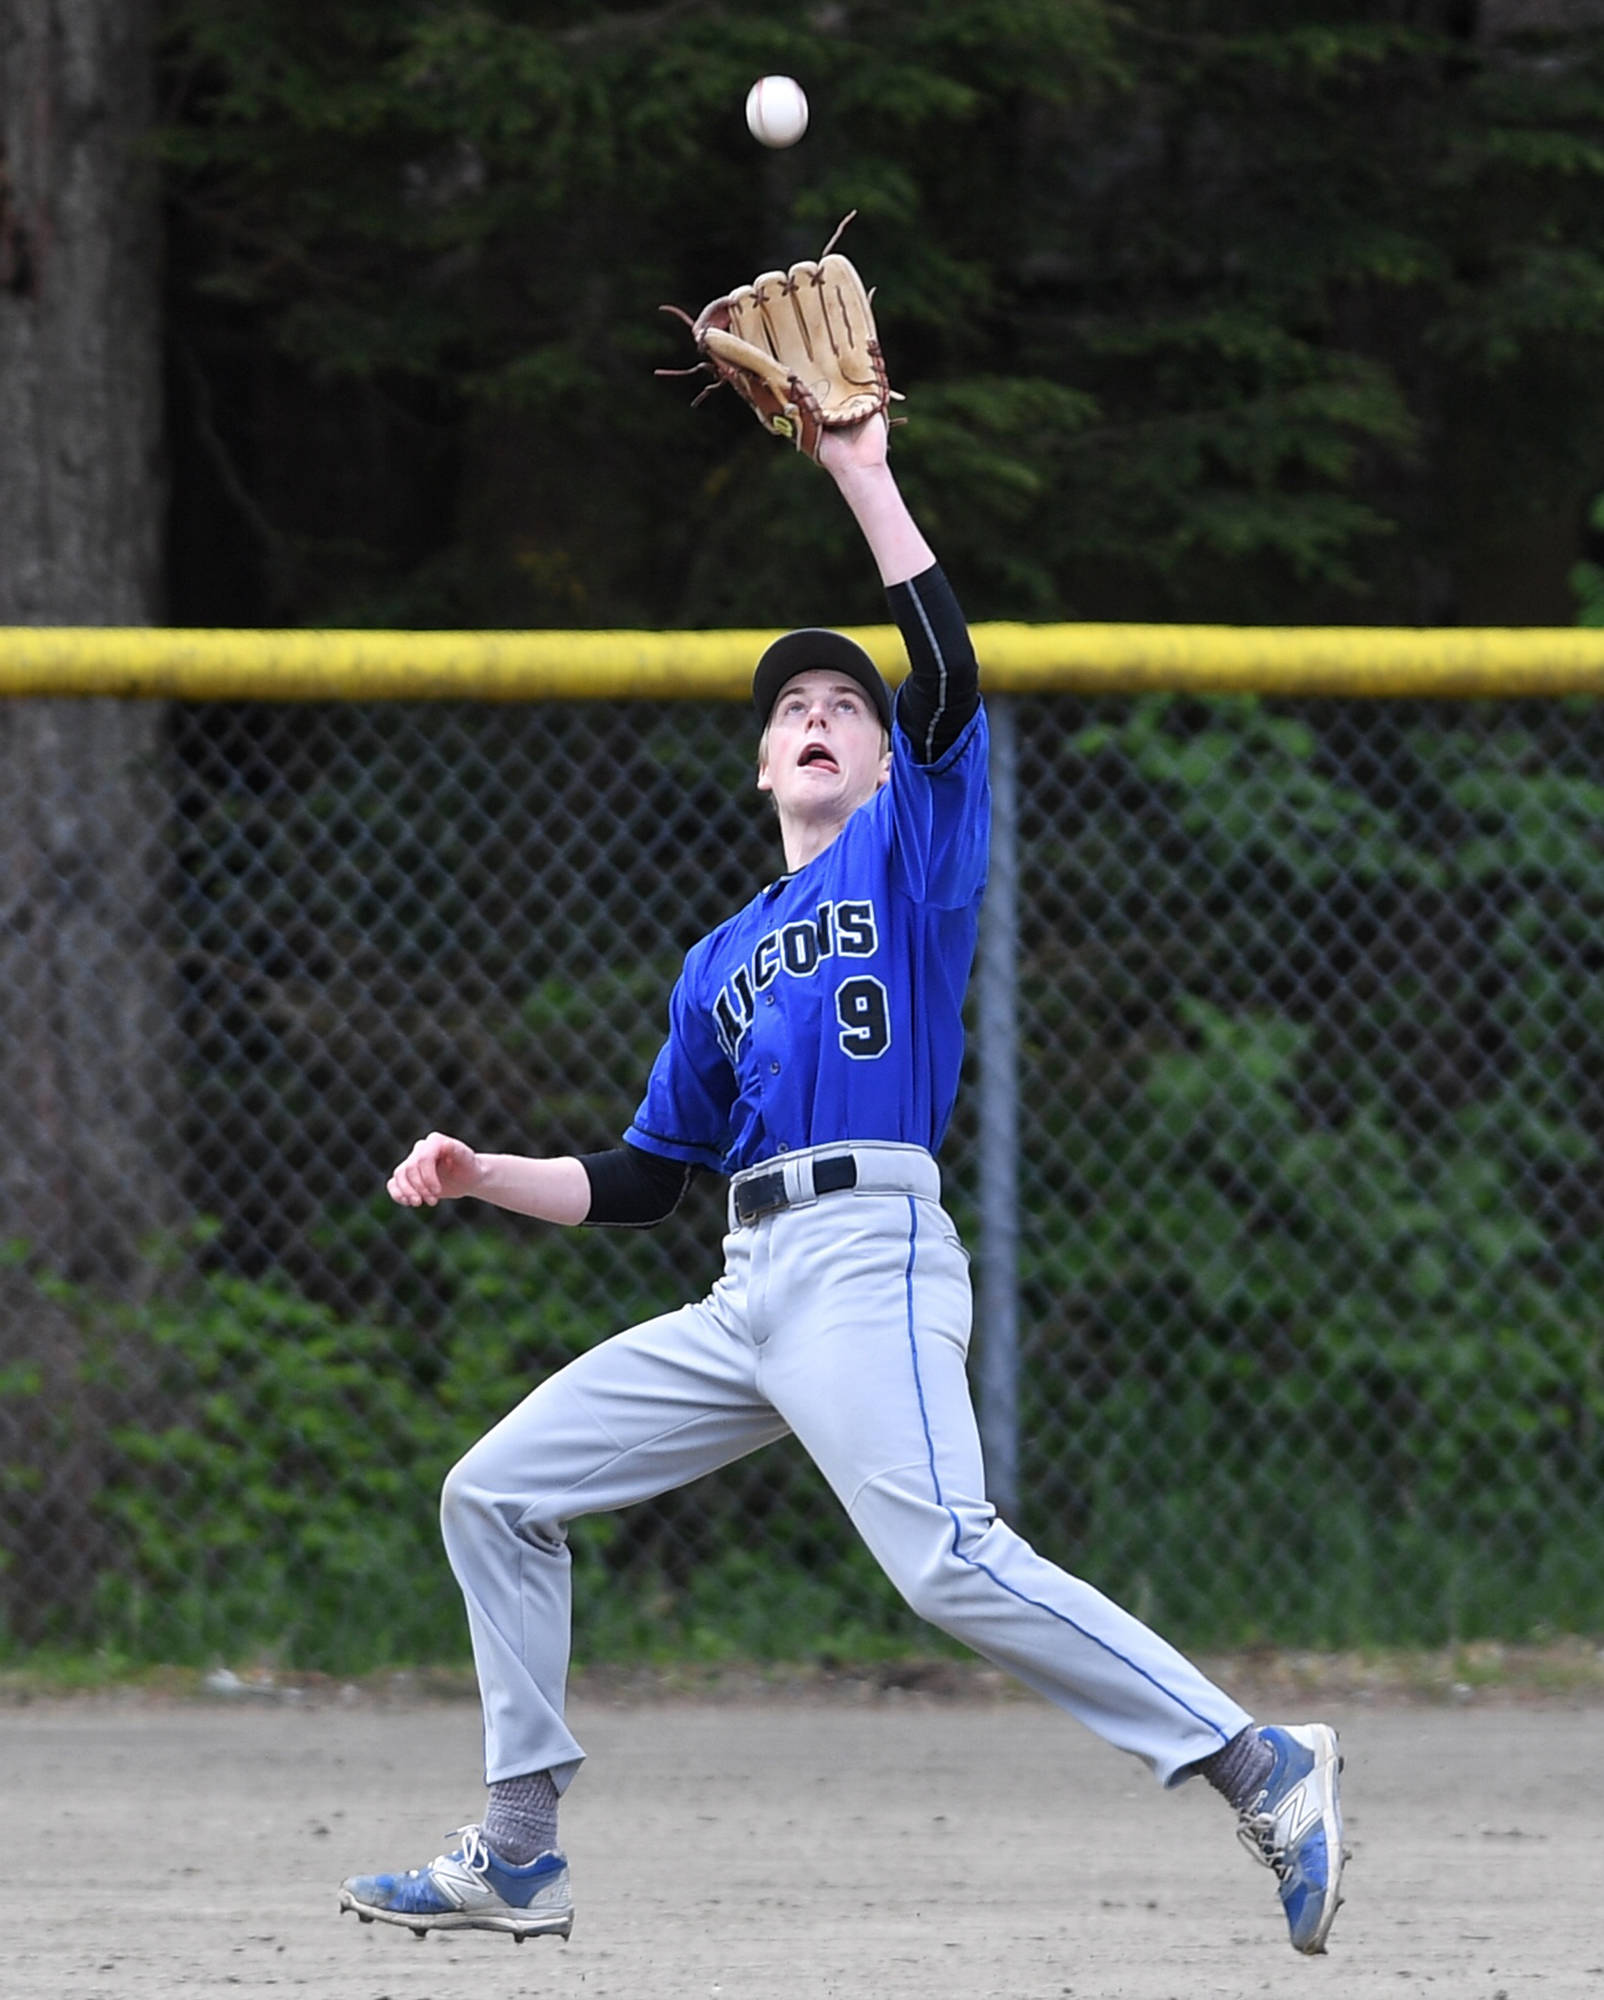 Thunder Mountain’s Cameron Eppers catches a fly ball against Sitka during the Region V Baseball Championship at Adair-Kennedy Memorial Park on Friday, May 24, 2019. (Michael Penn | Juneau Empire)